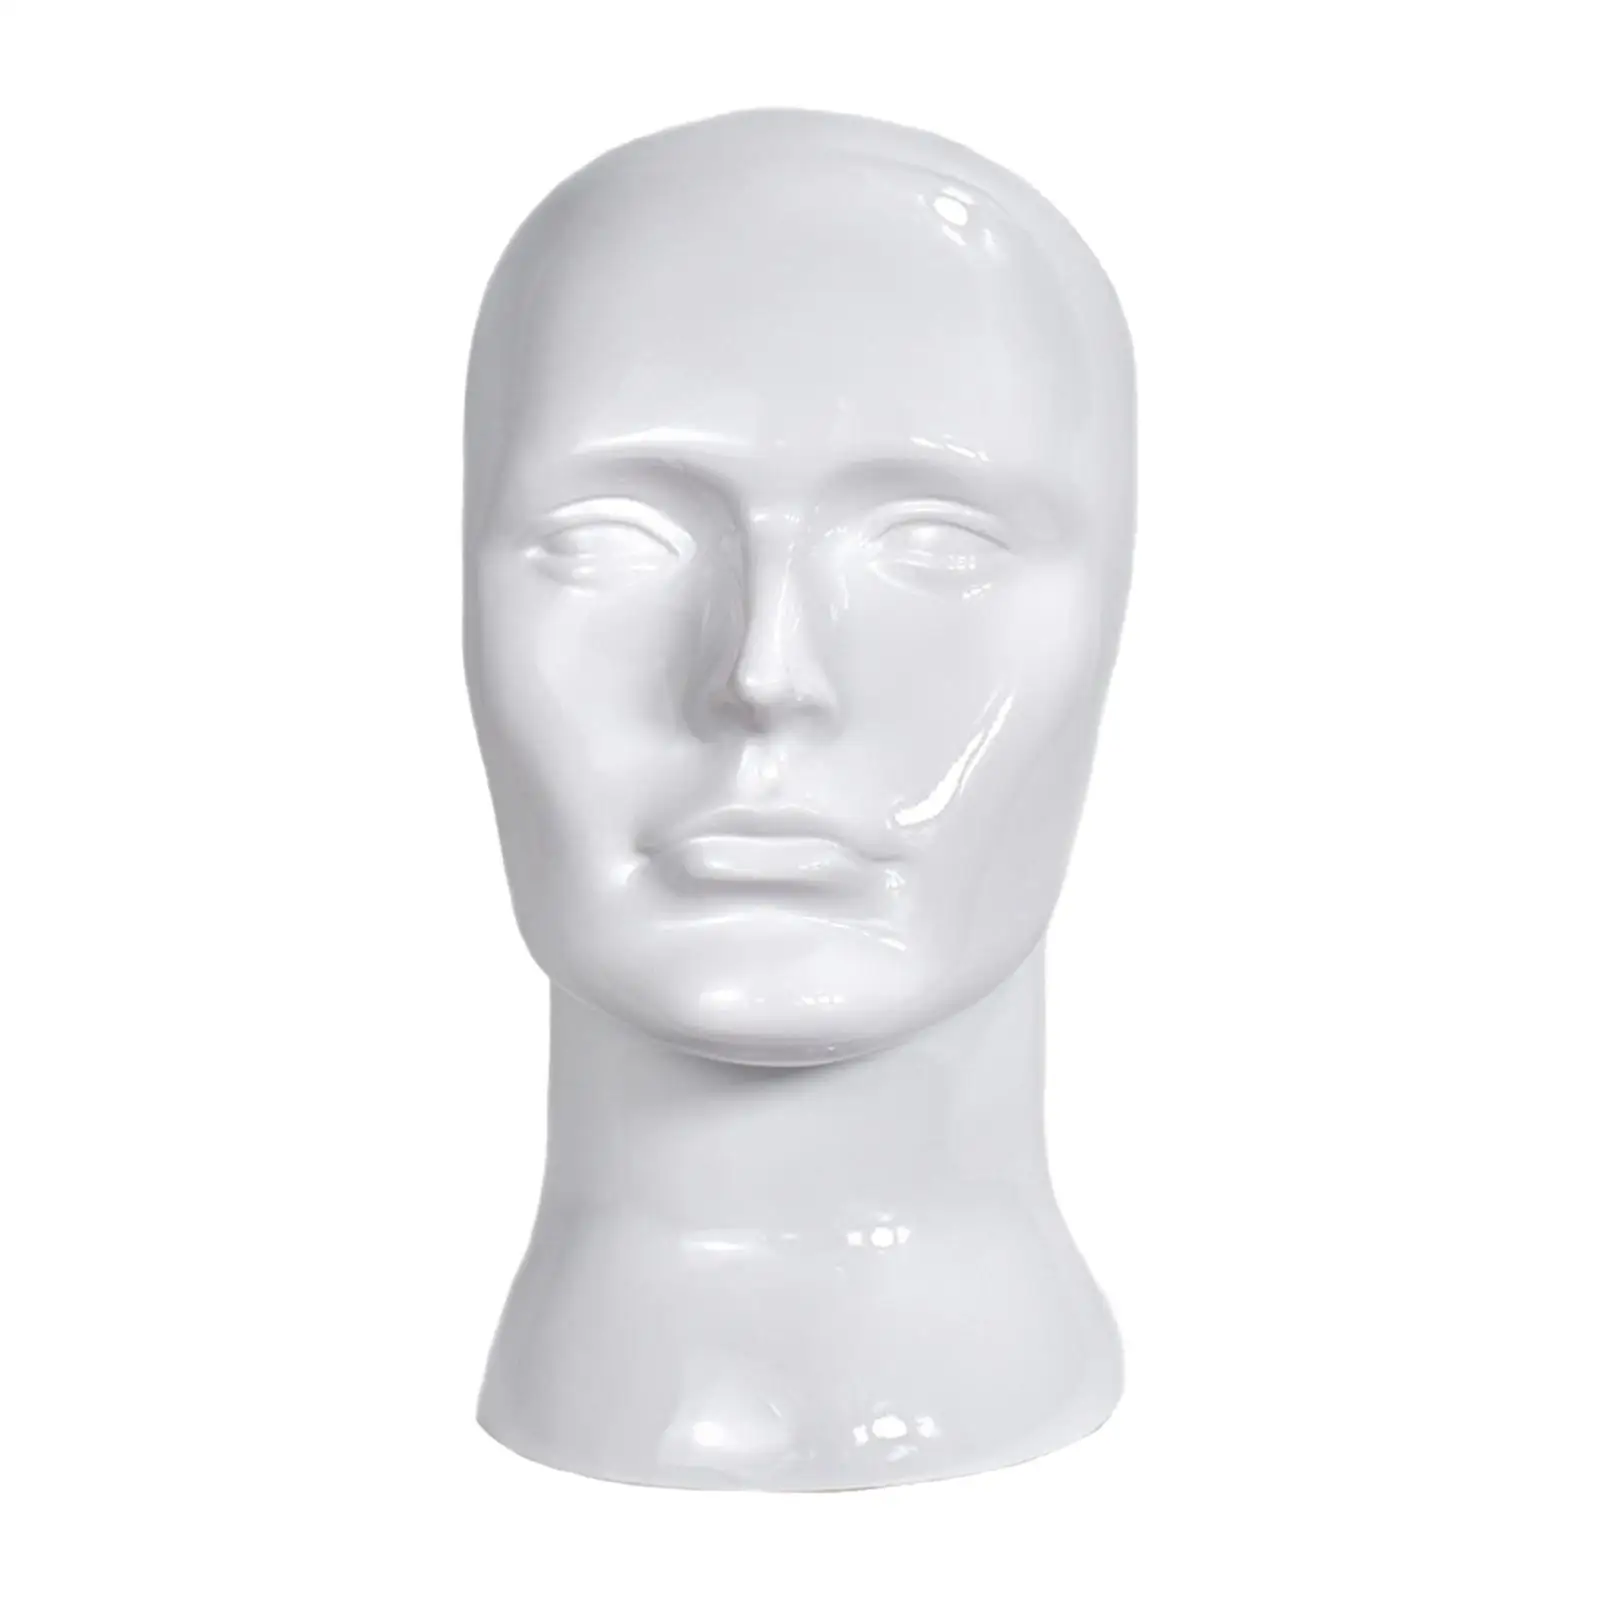 Mannequin Head Lightweight Professional Display Head Hat Display Stand for Salon Shopping Mall Display Jewellery Glasses